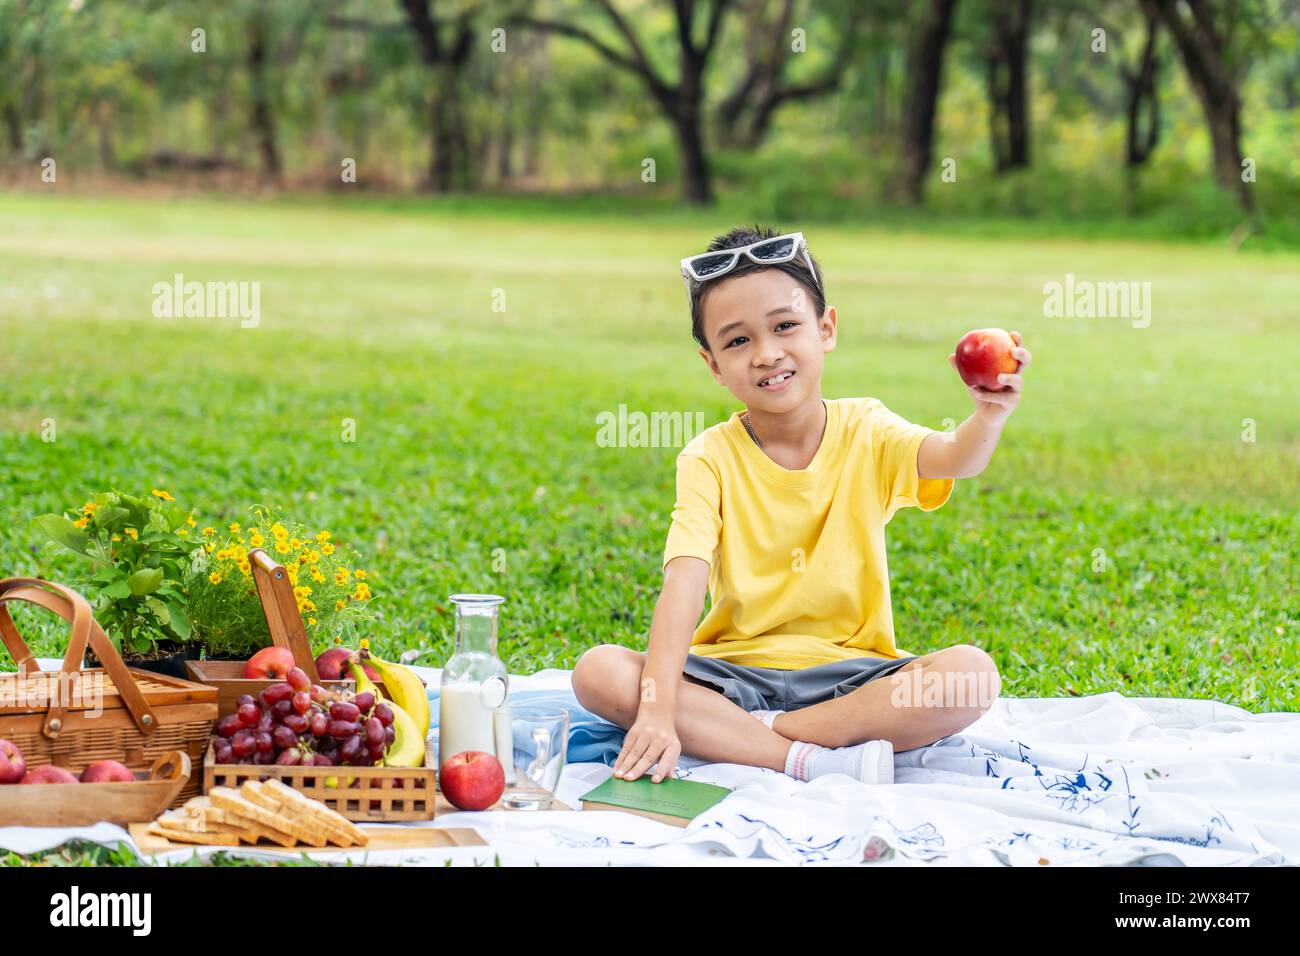 A child sitting on green grass, holding an apple, next to a picnic basket Stock Photo